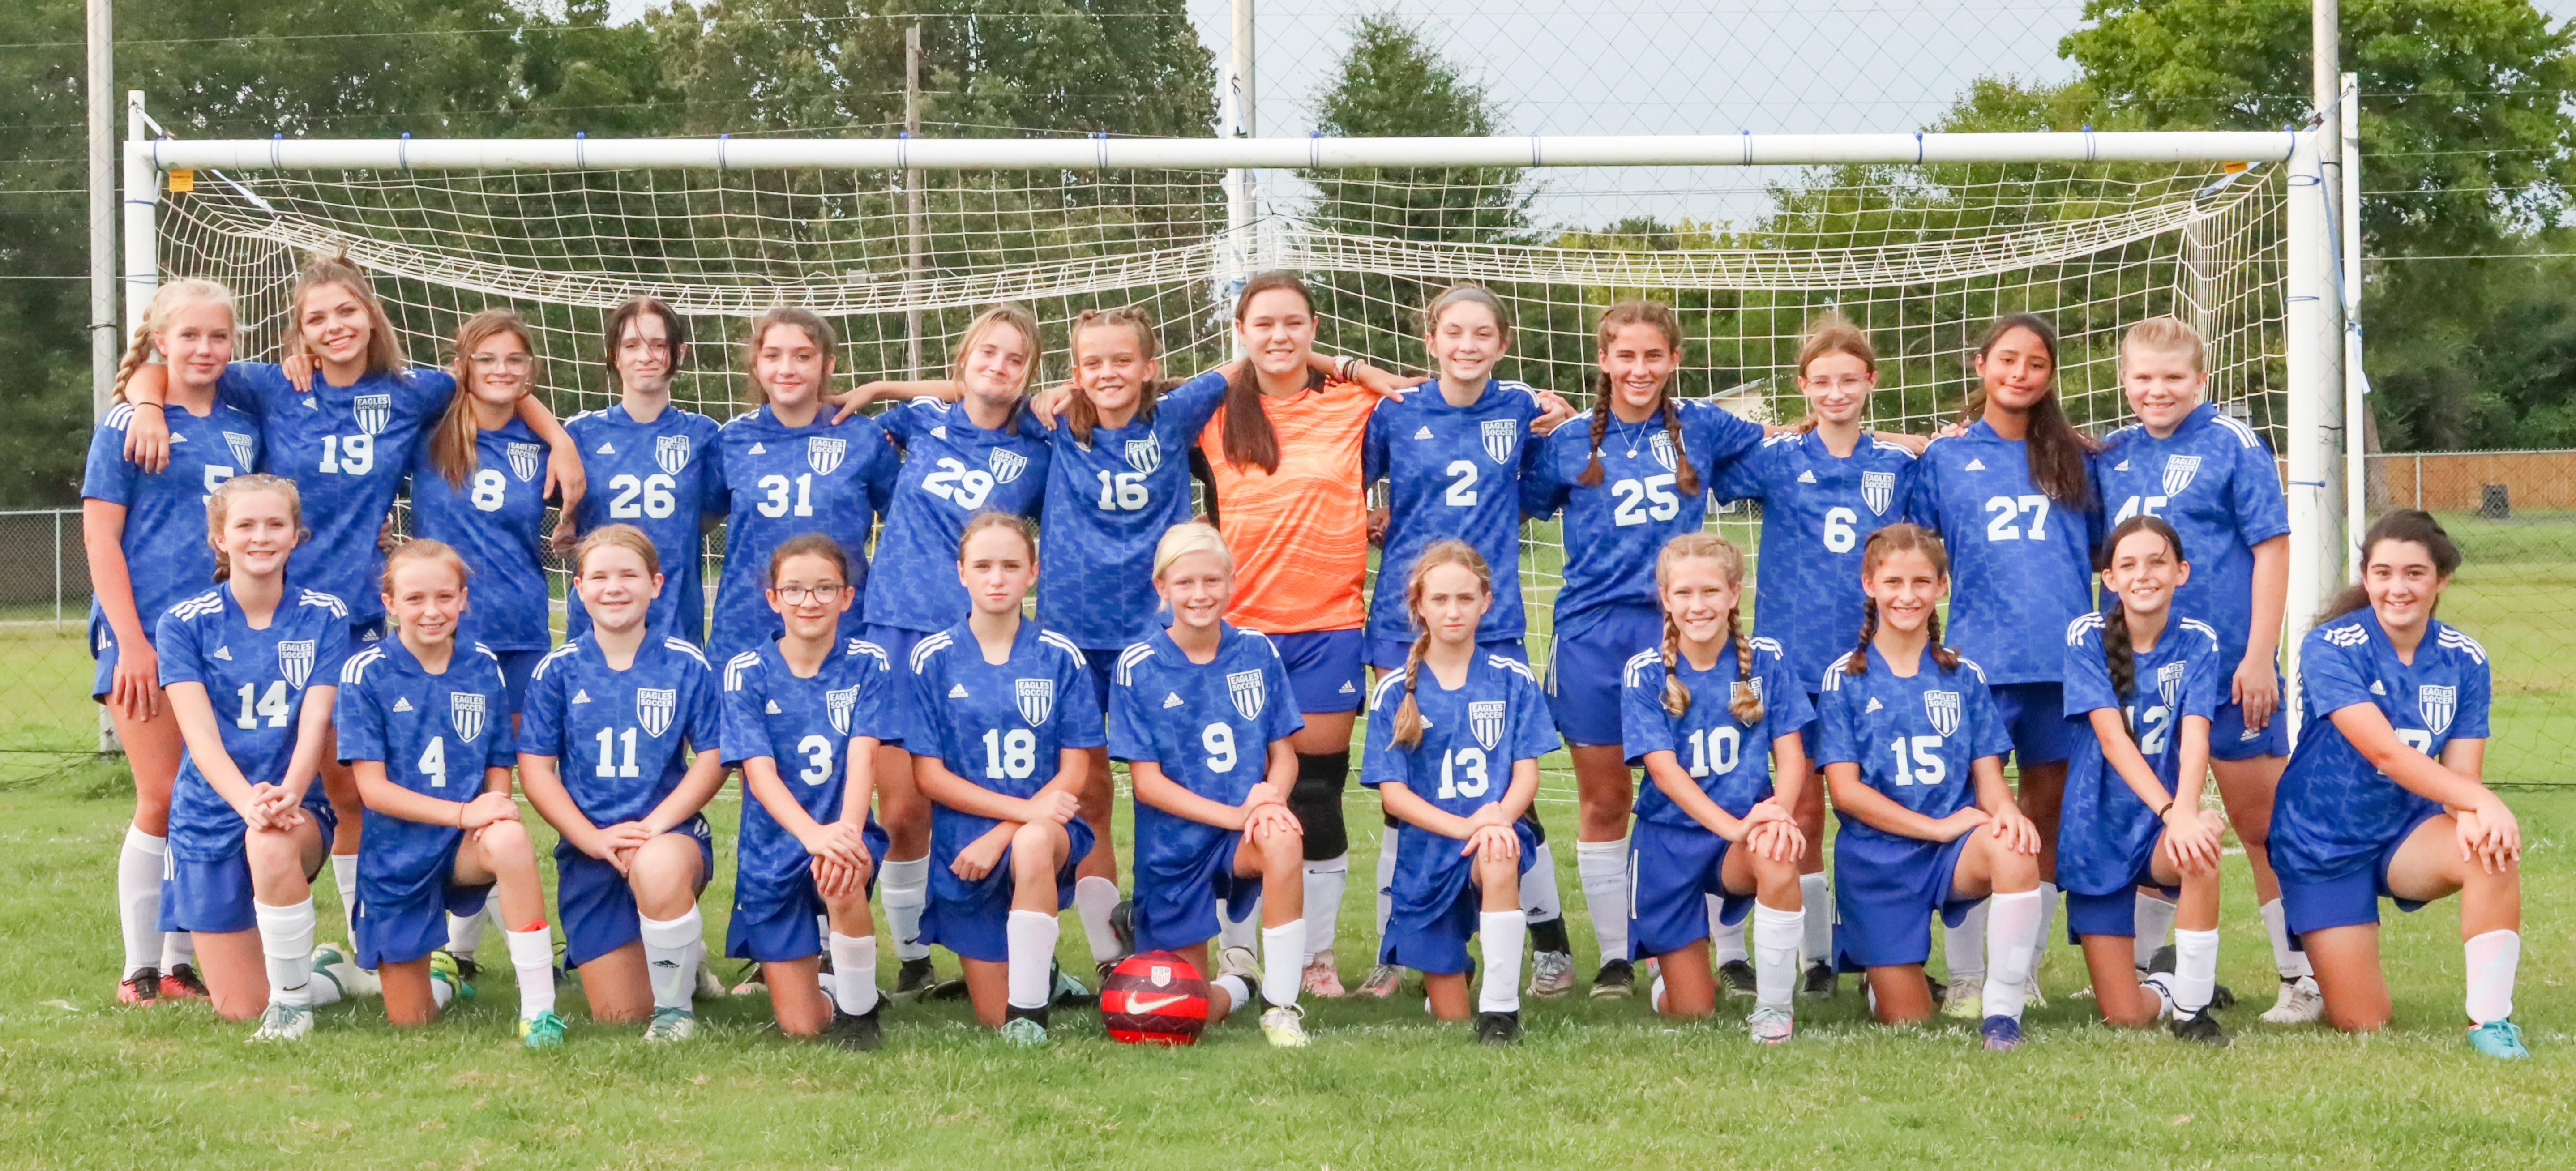 JH Girls Soccer Team Picture